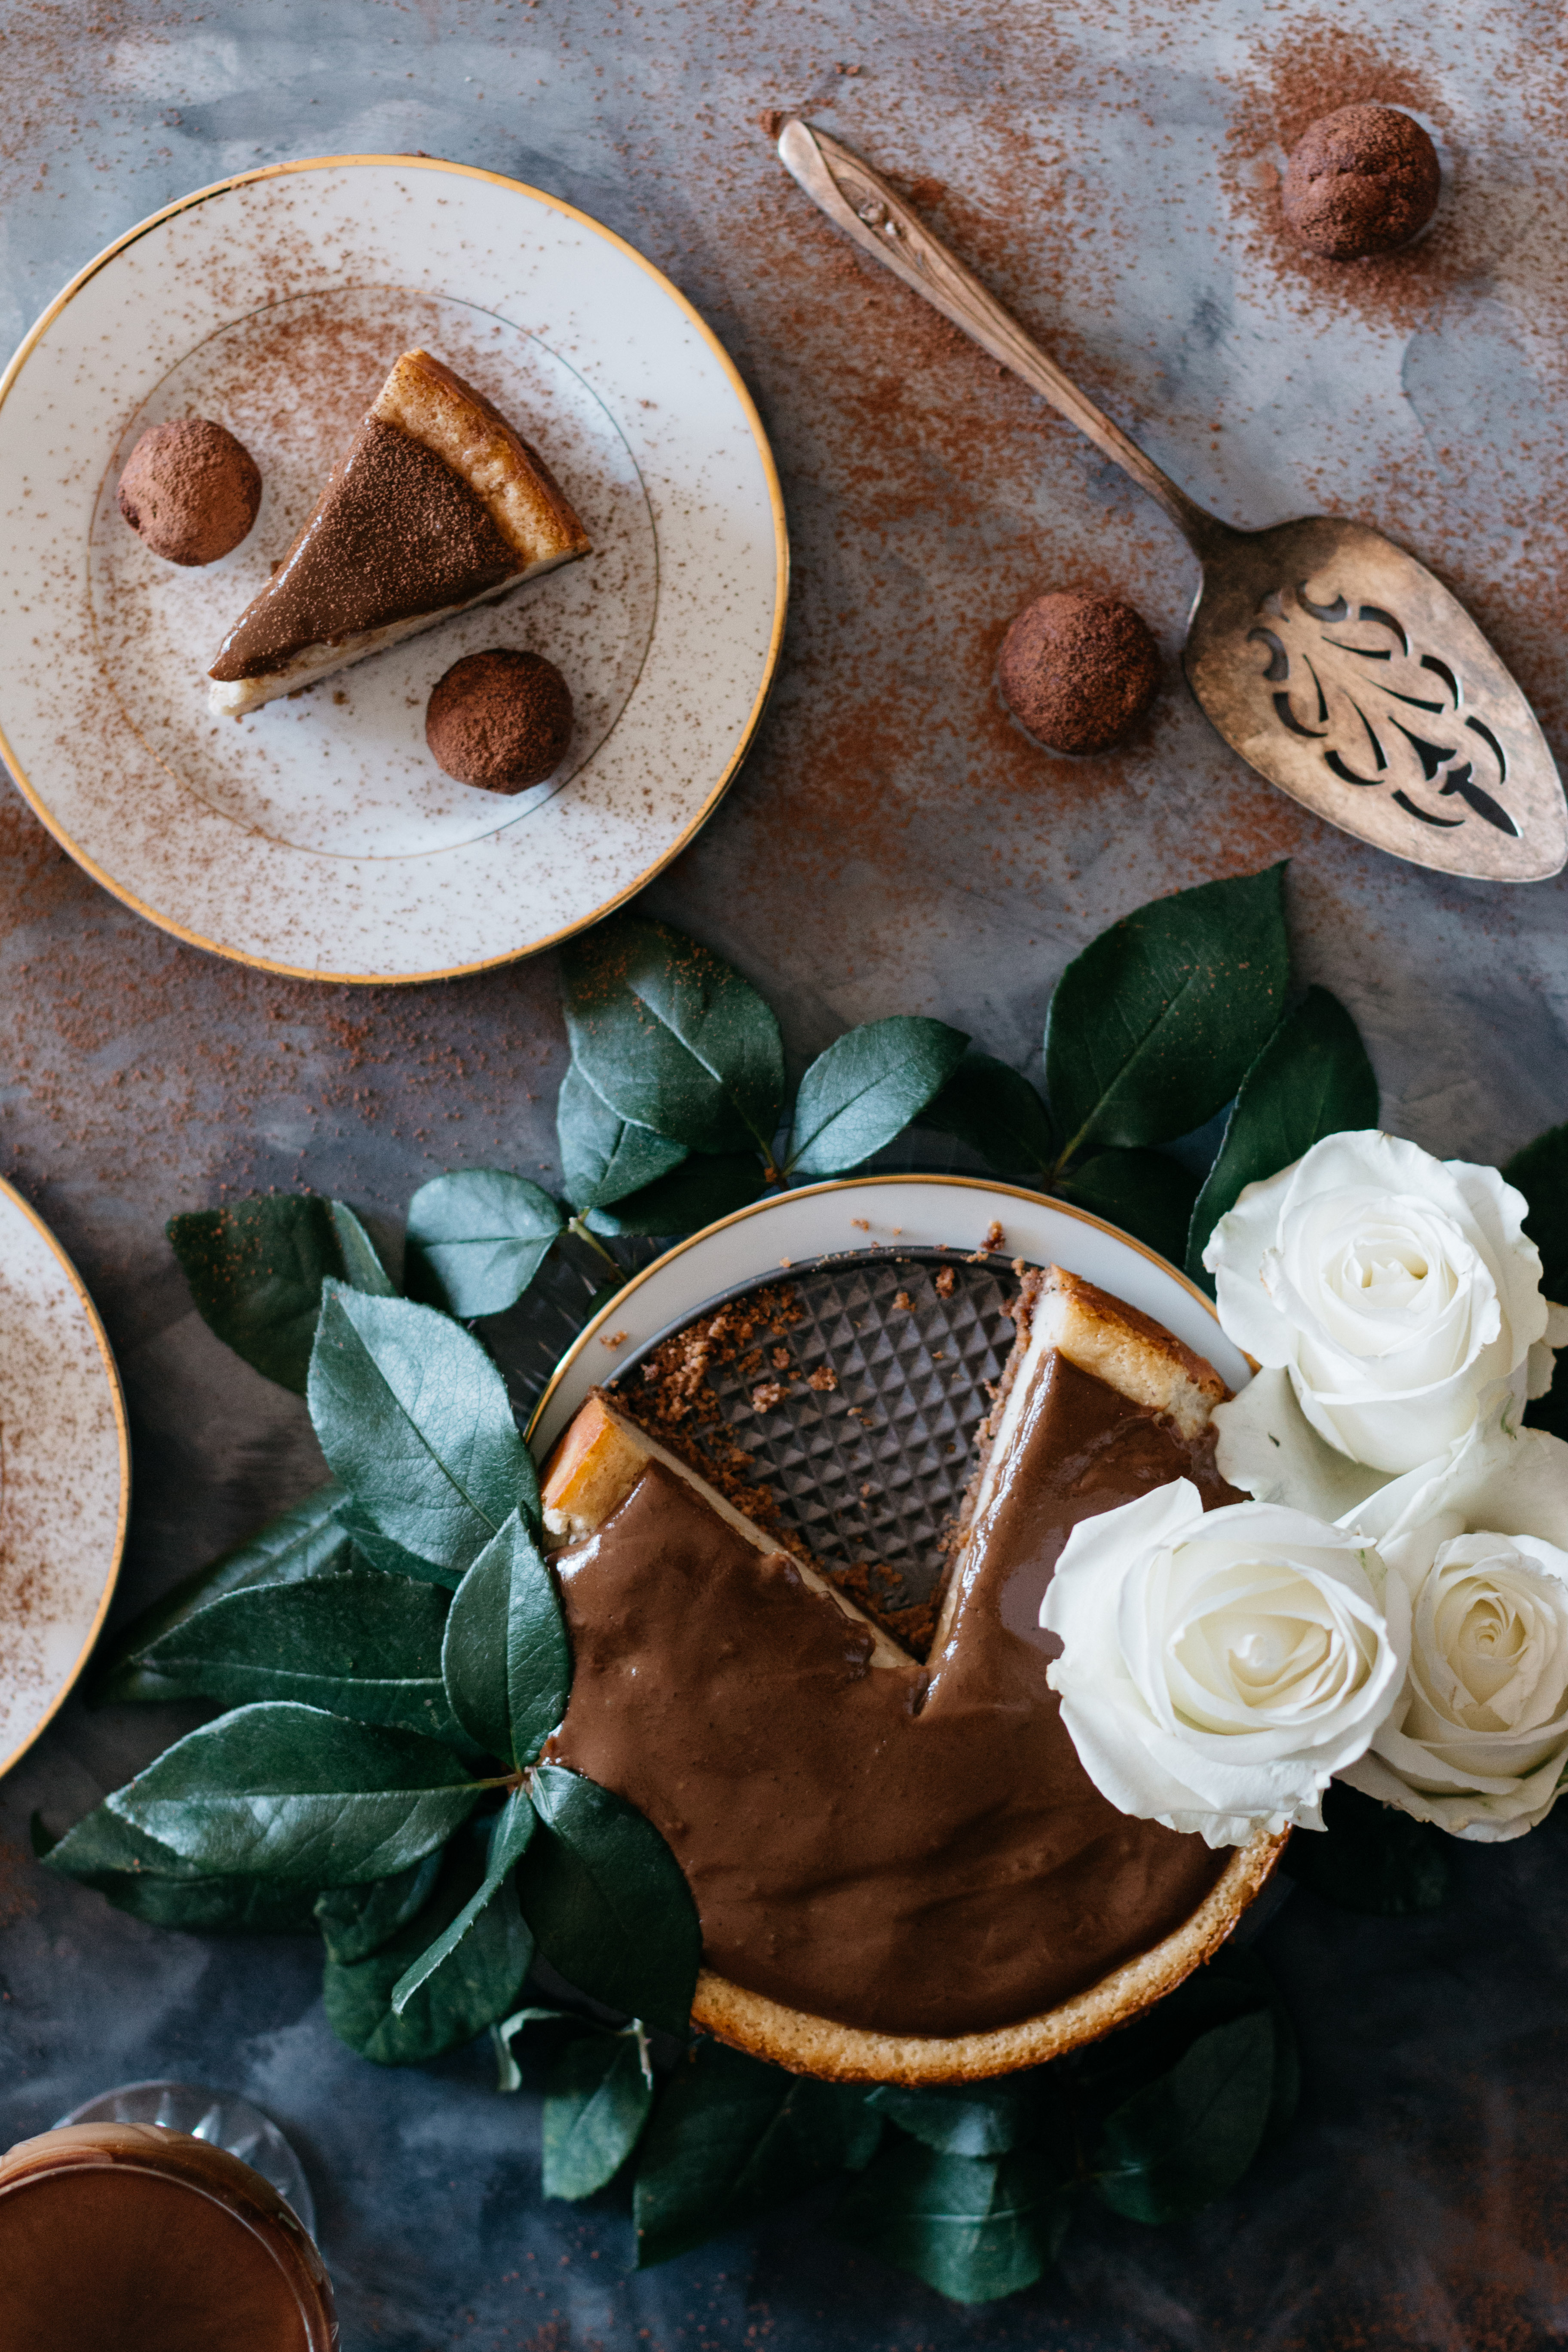 Overhead shot of a cheesecake surrounded by leaves and roses next to a plate with a cheesecake slice, truffles, and a pie server.